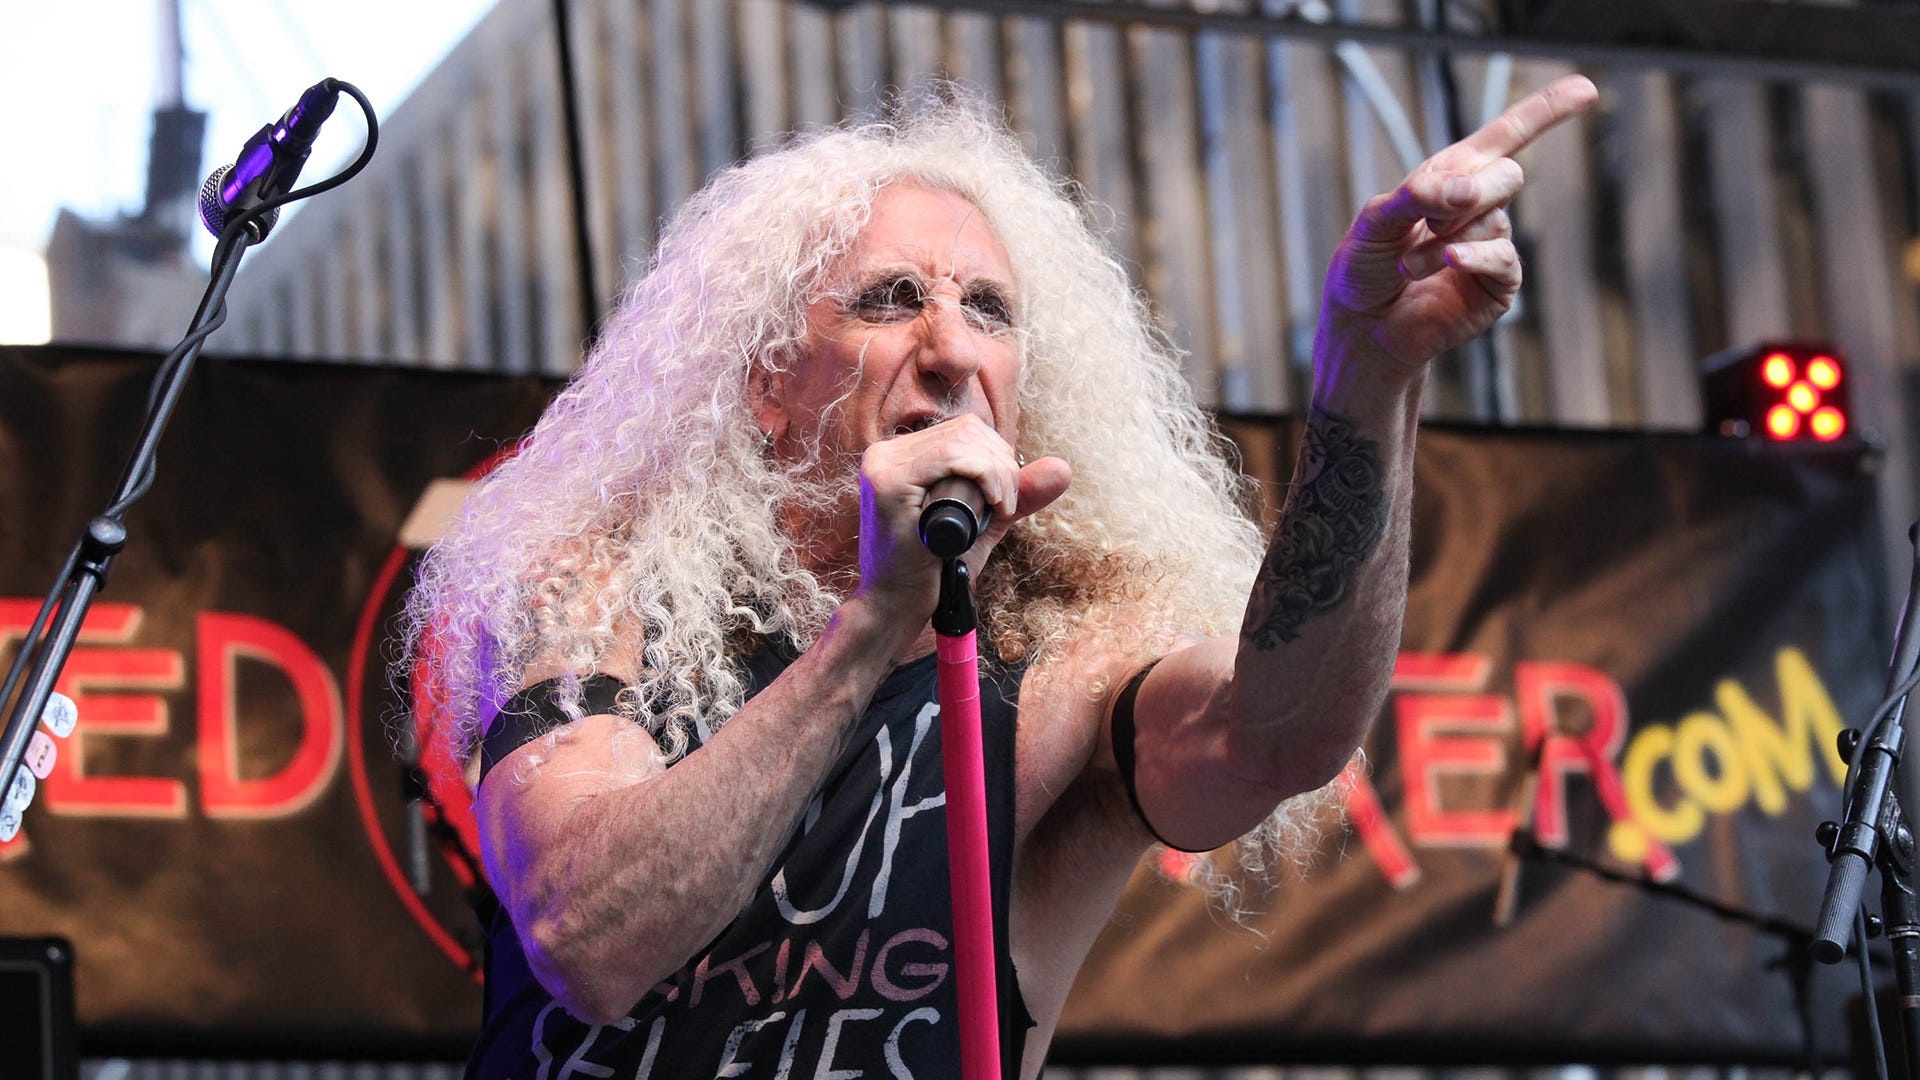 Powerful performances, Rally cry, Dee Snider approved, Ukrainian fans, 1920x1080 Full HD Desktop